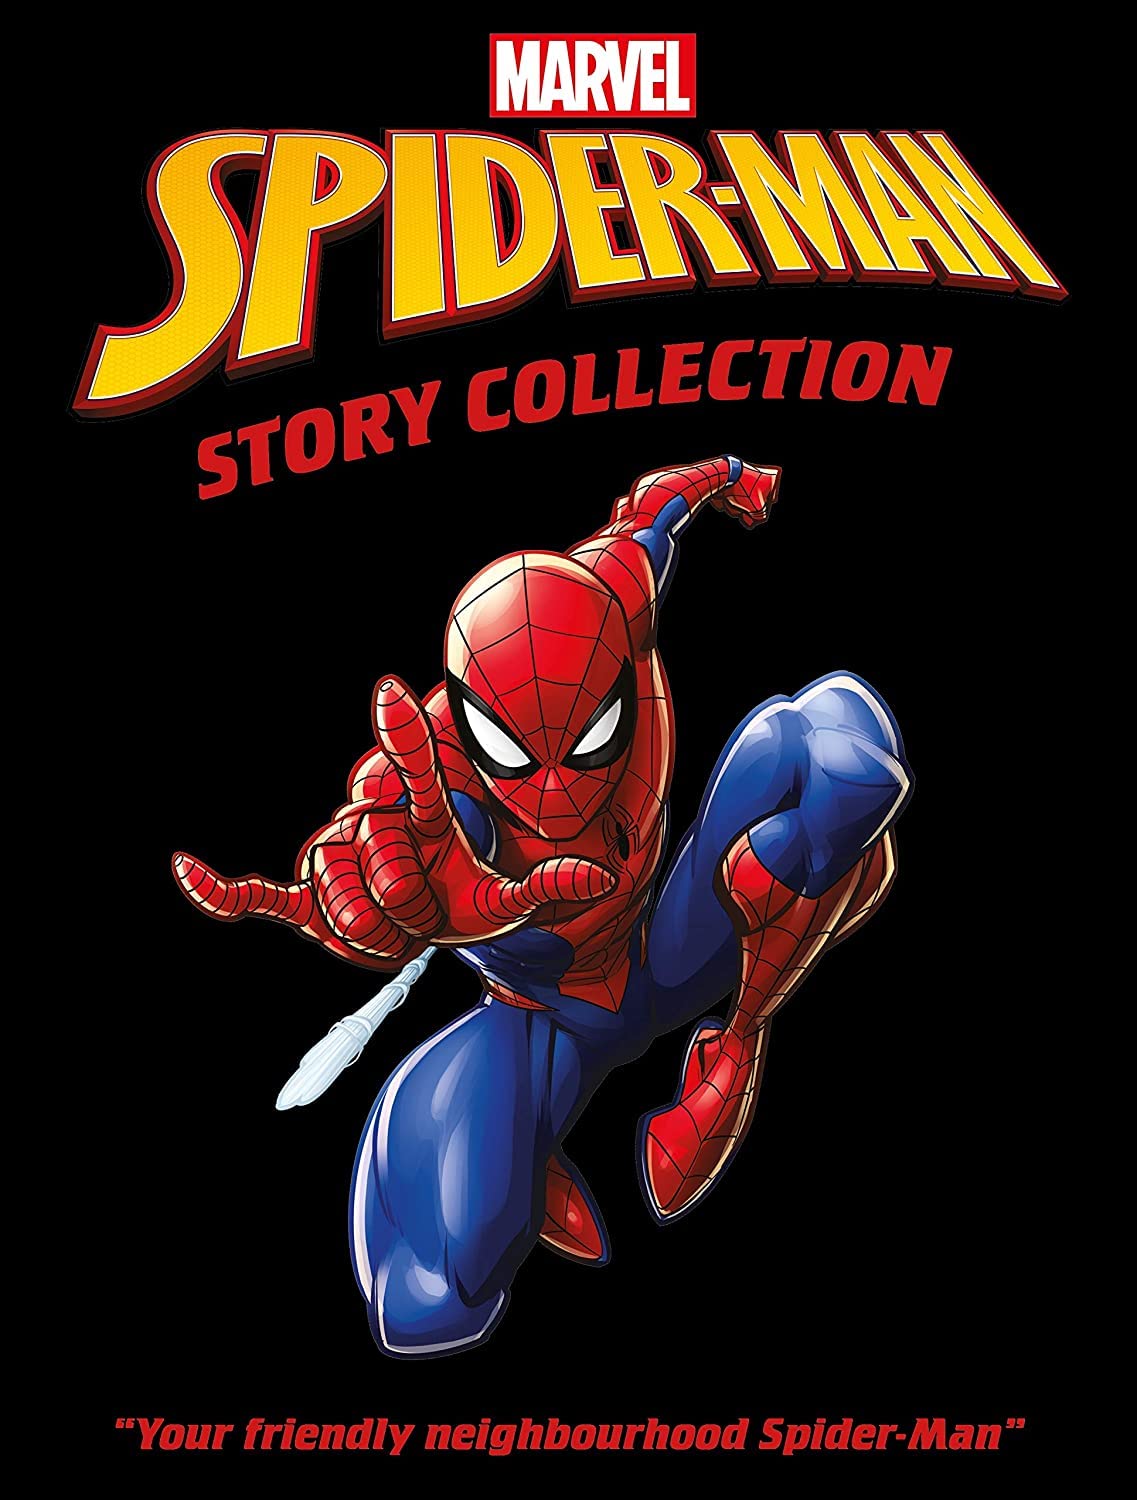 Marvel Spider-Man Story Collection (Deluxe Treasury 196 2 Marvel) Hardcover